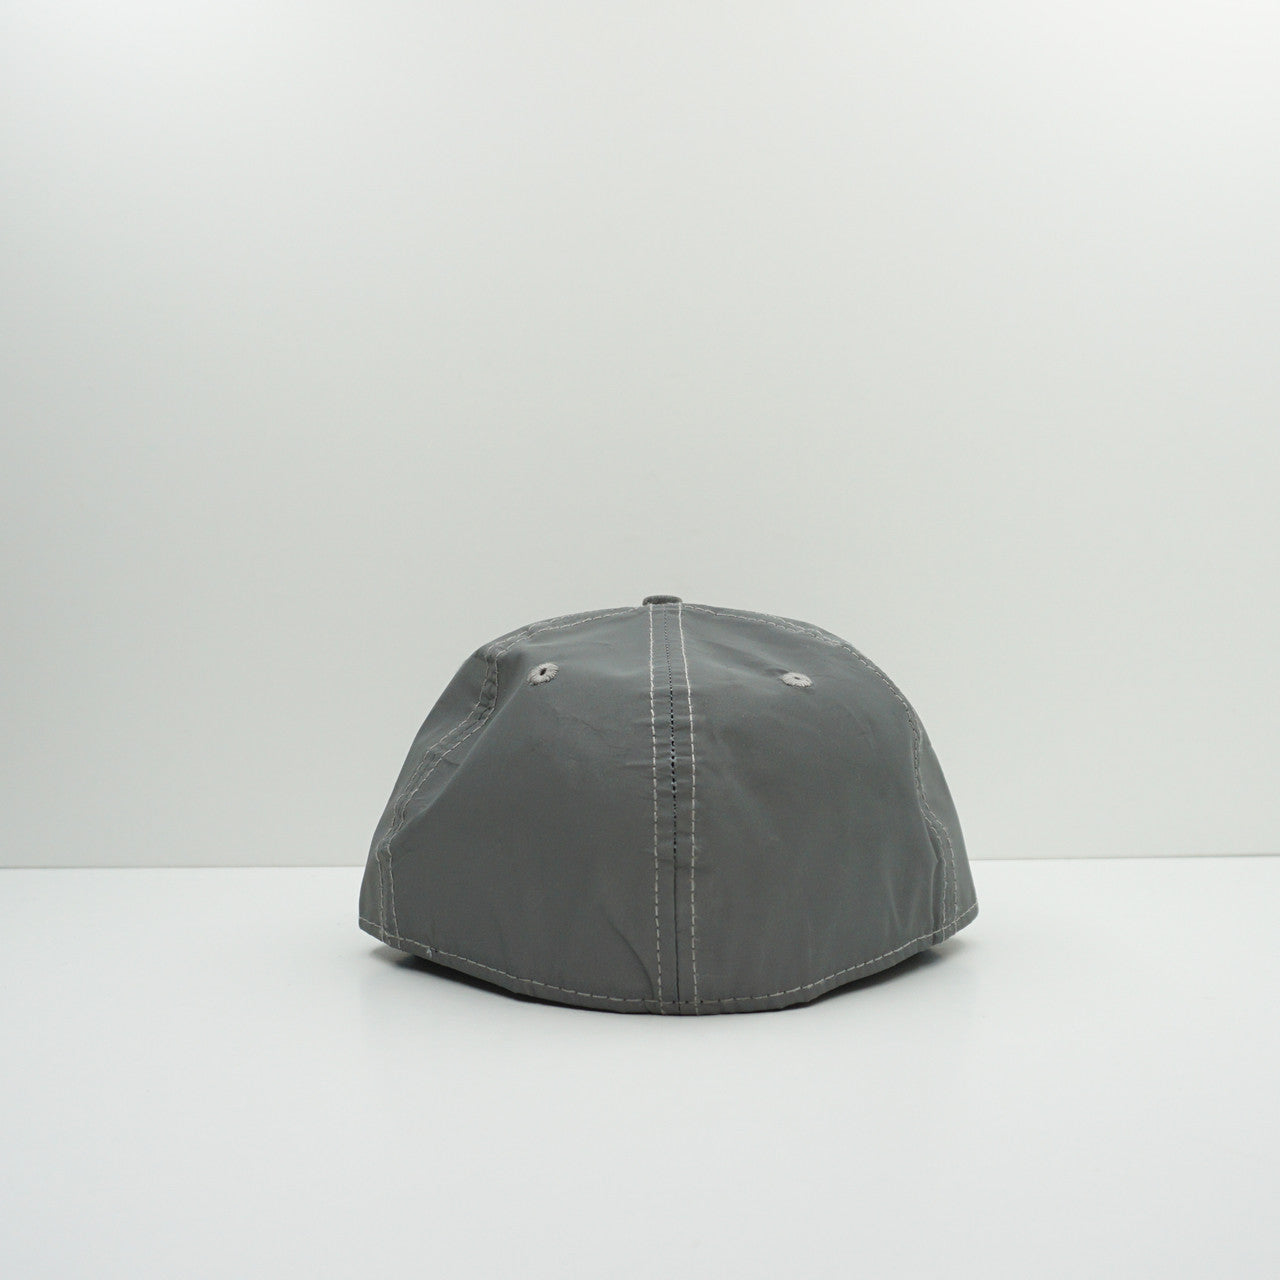 New Era Grey Reflective Fitted Cap